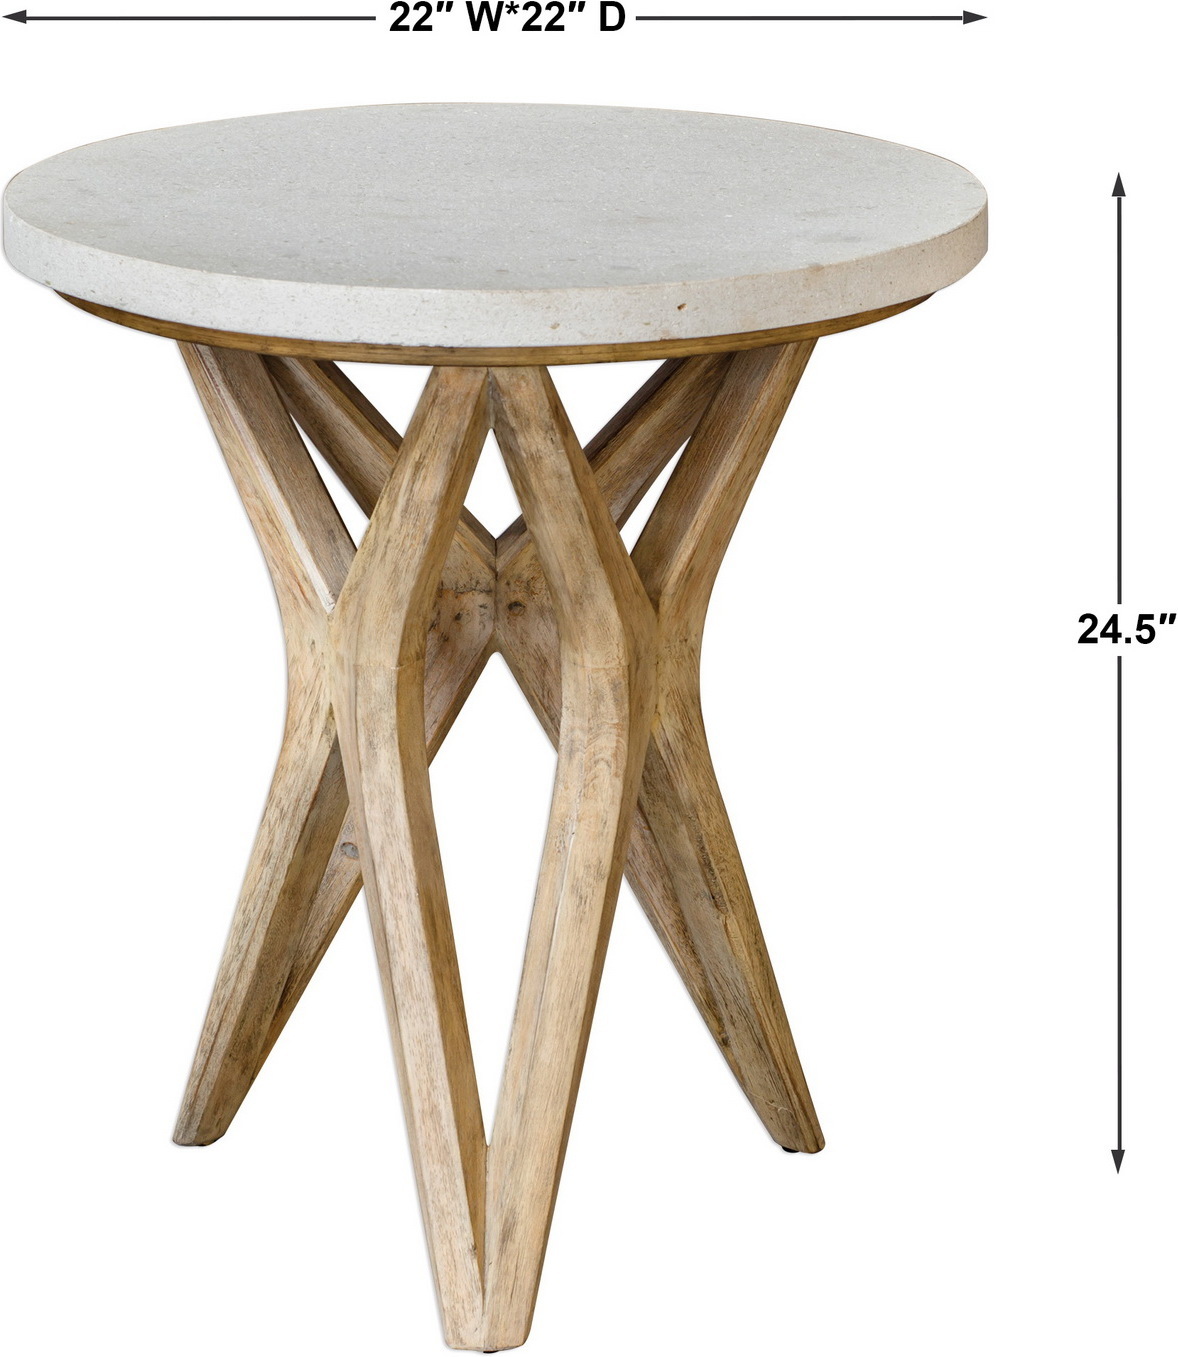 stool table Uttermost Accent & End Tables Accent Tables Handcrafted From Solid Mixed Woods With An Natural Ivory Limestone Top, On A Geometric Base Finished In A Warm Oatmeal Wash. True To The Characteristics Of Natural Stone, Each Piece Will Have Unique Coloration And Veining. Solid Wood Will Continue To Move With Temperature And Humidity Changes, Which Can Result In Cracks And Uneven Surfaces, Adding To Its Authenticity And Character.